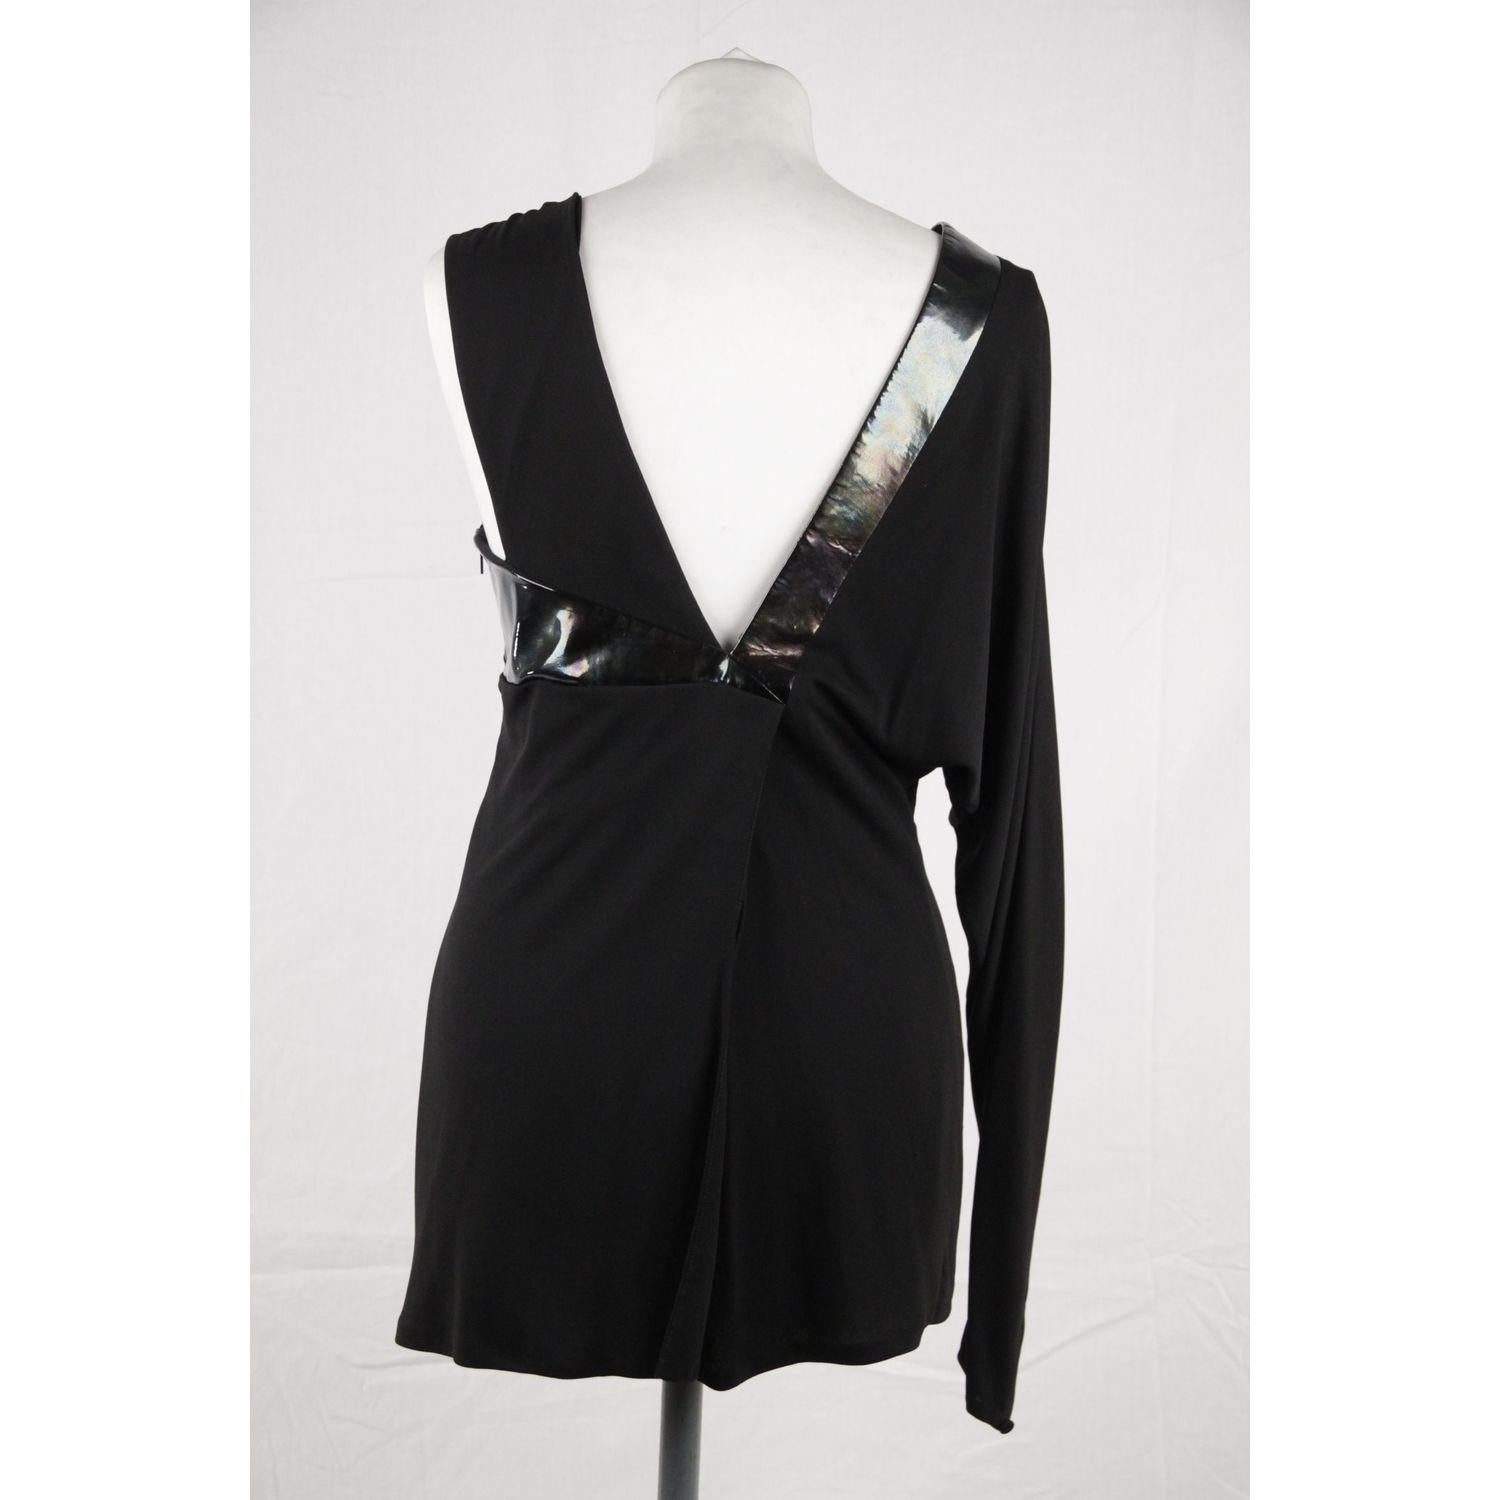 Gucci Black Jersey Asymmetric Top with Patent Leather Trim Size 42 3